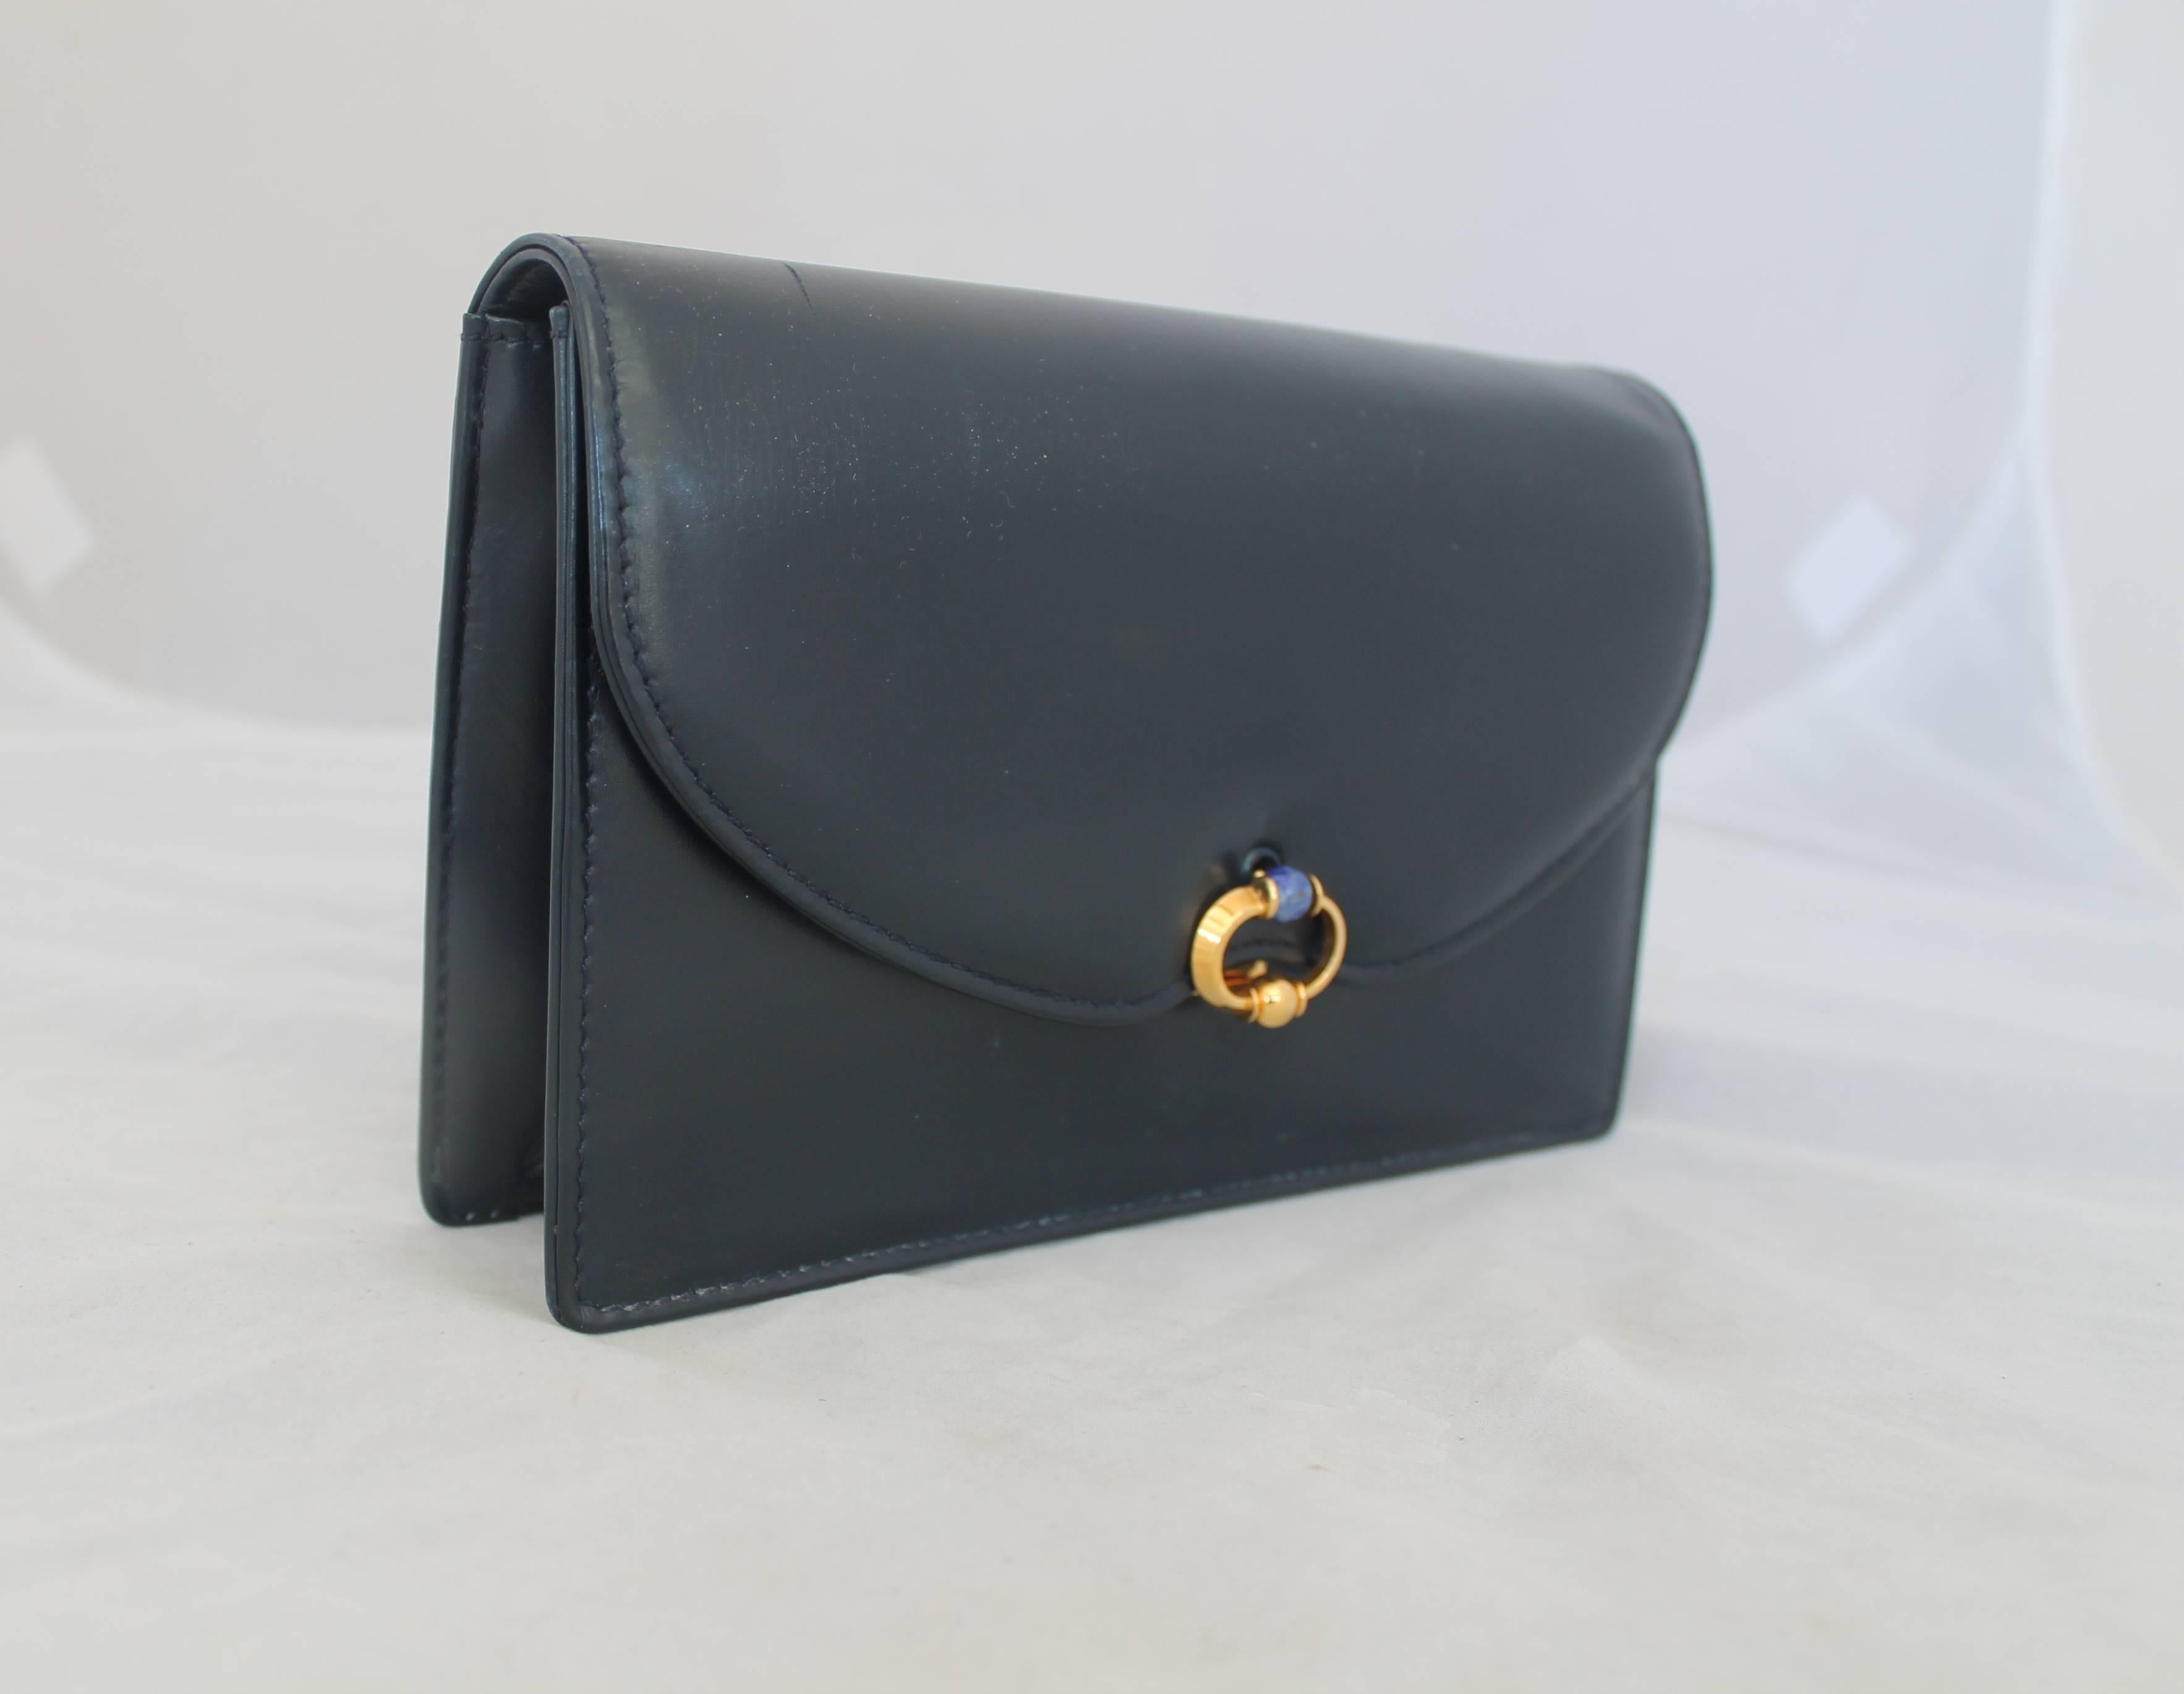 Gucci Vintage Navy Leather Clutch - GHW - Circa 1950's.  The beautiful vintage clutch is in excellent vintage condition.  It features a gold circular clasp and a blue jewel at center, a chic navy leather, a zipped compartment on the inside, and it